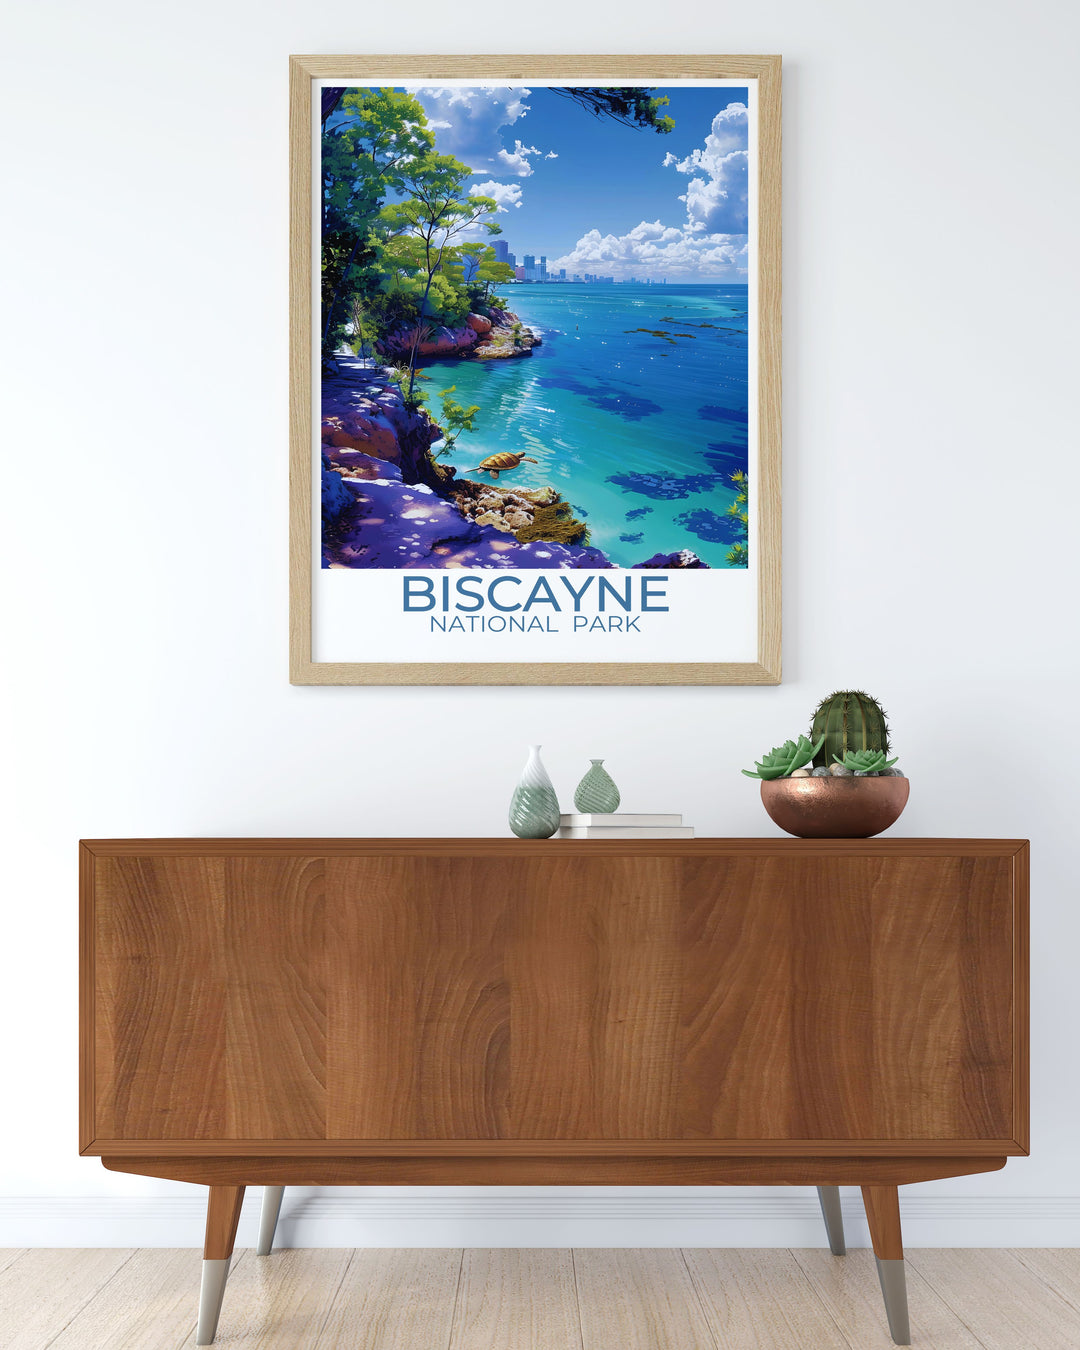 Detailed digital download of Biscayne National Park, featuring the tranquil Biscayne Bay Trail and vibrant coral reefs, ideal for any art collection or as a memorable travel keepsake.